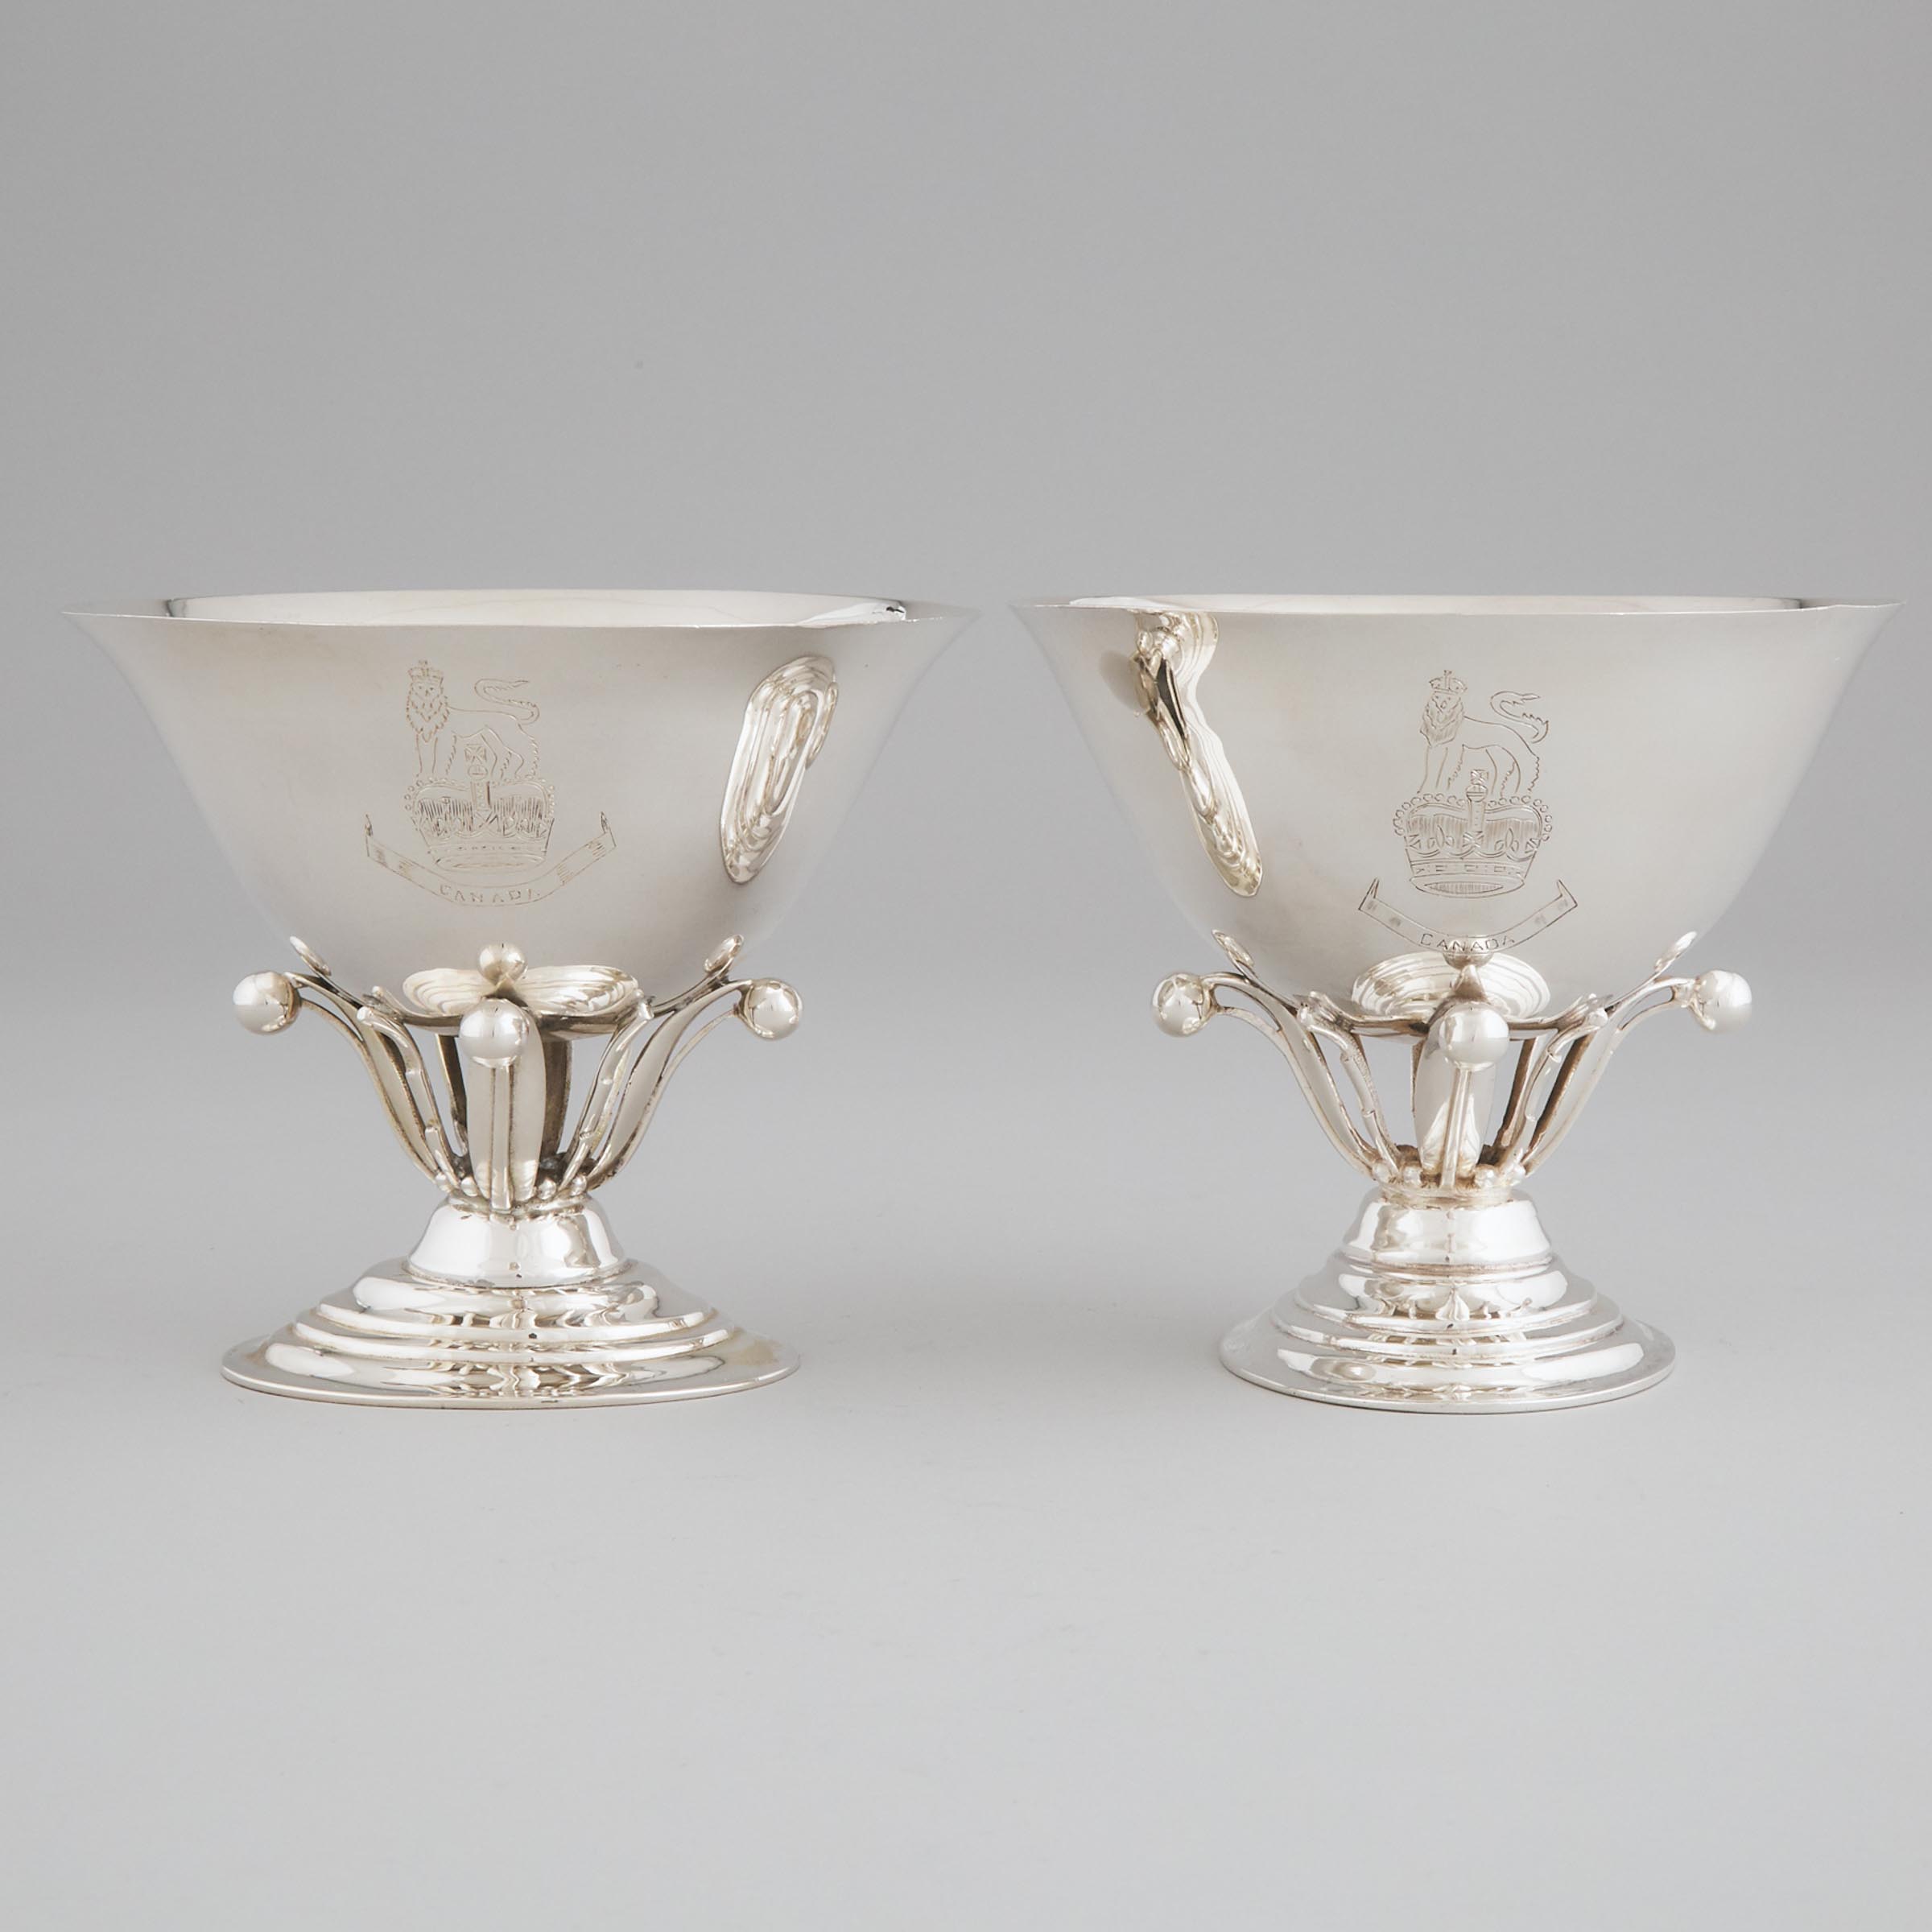 Pair of Indian Silver Pedestal-Footed